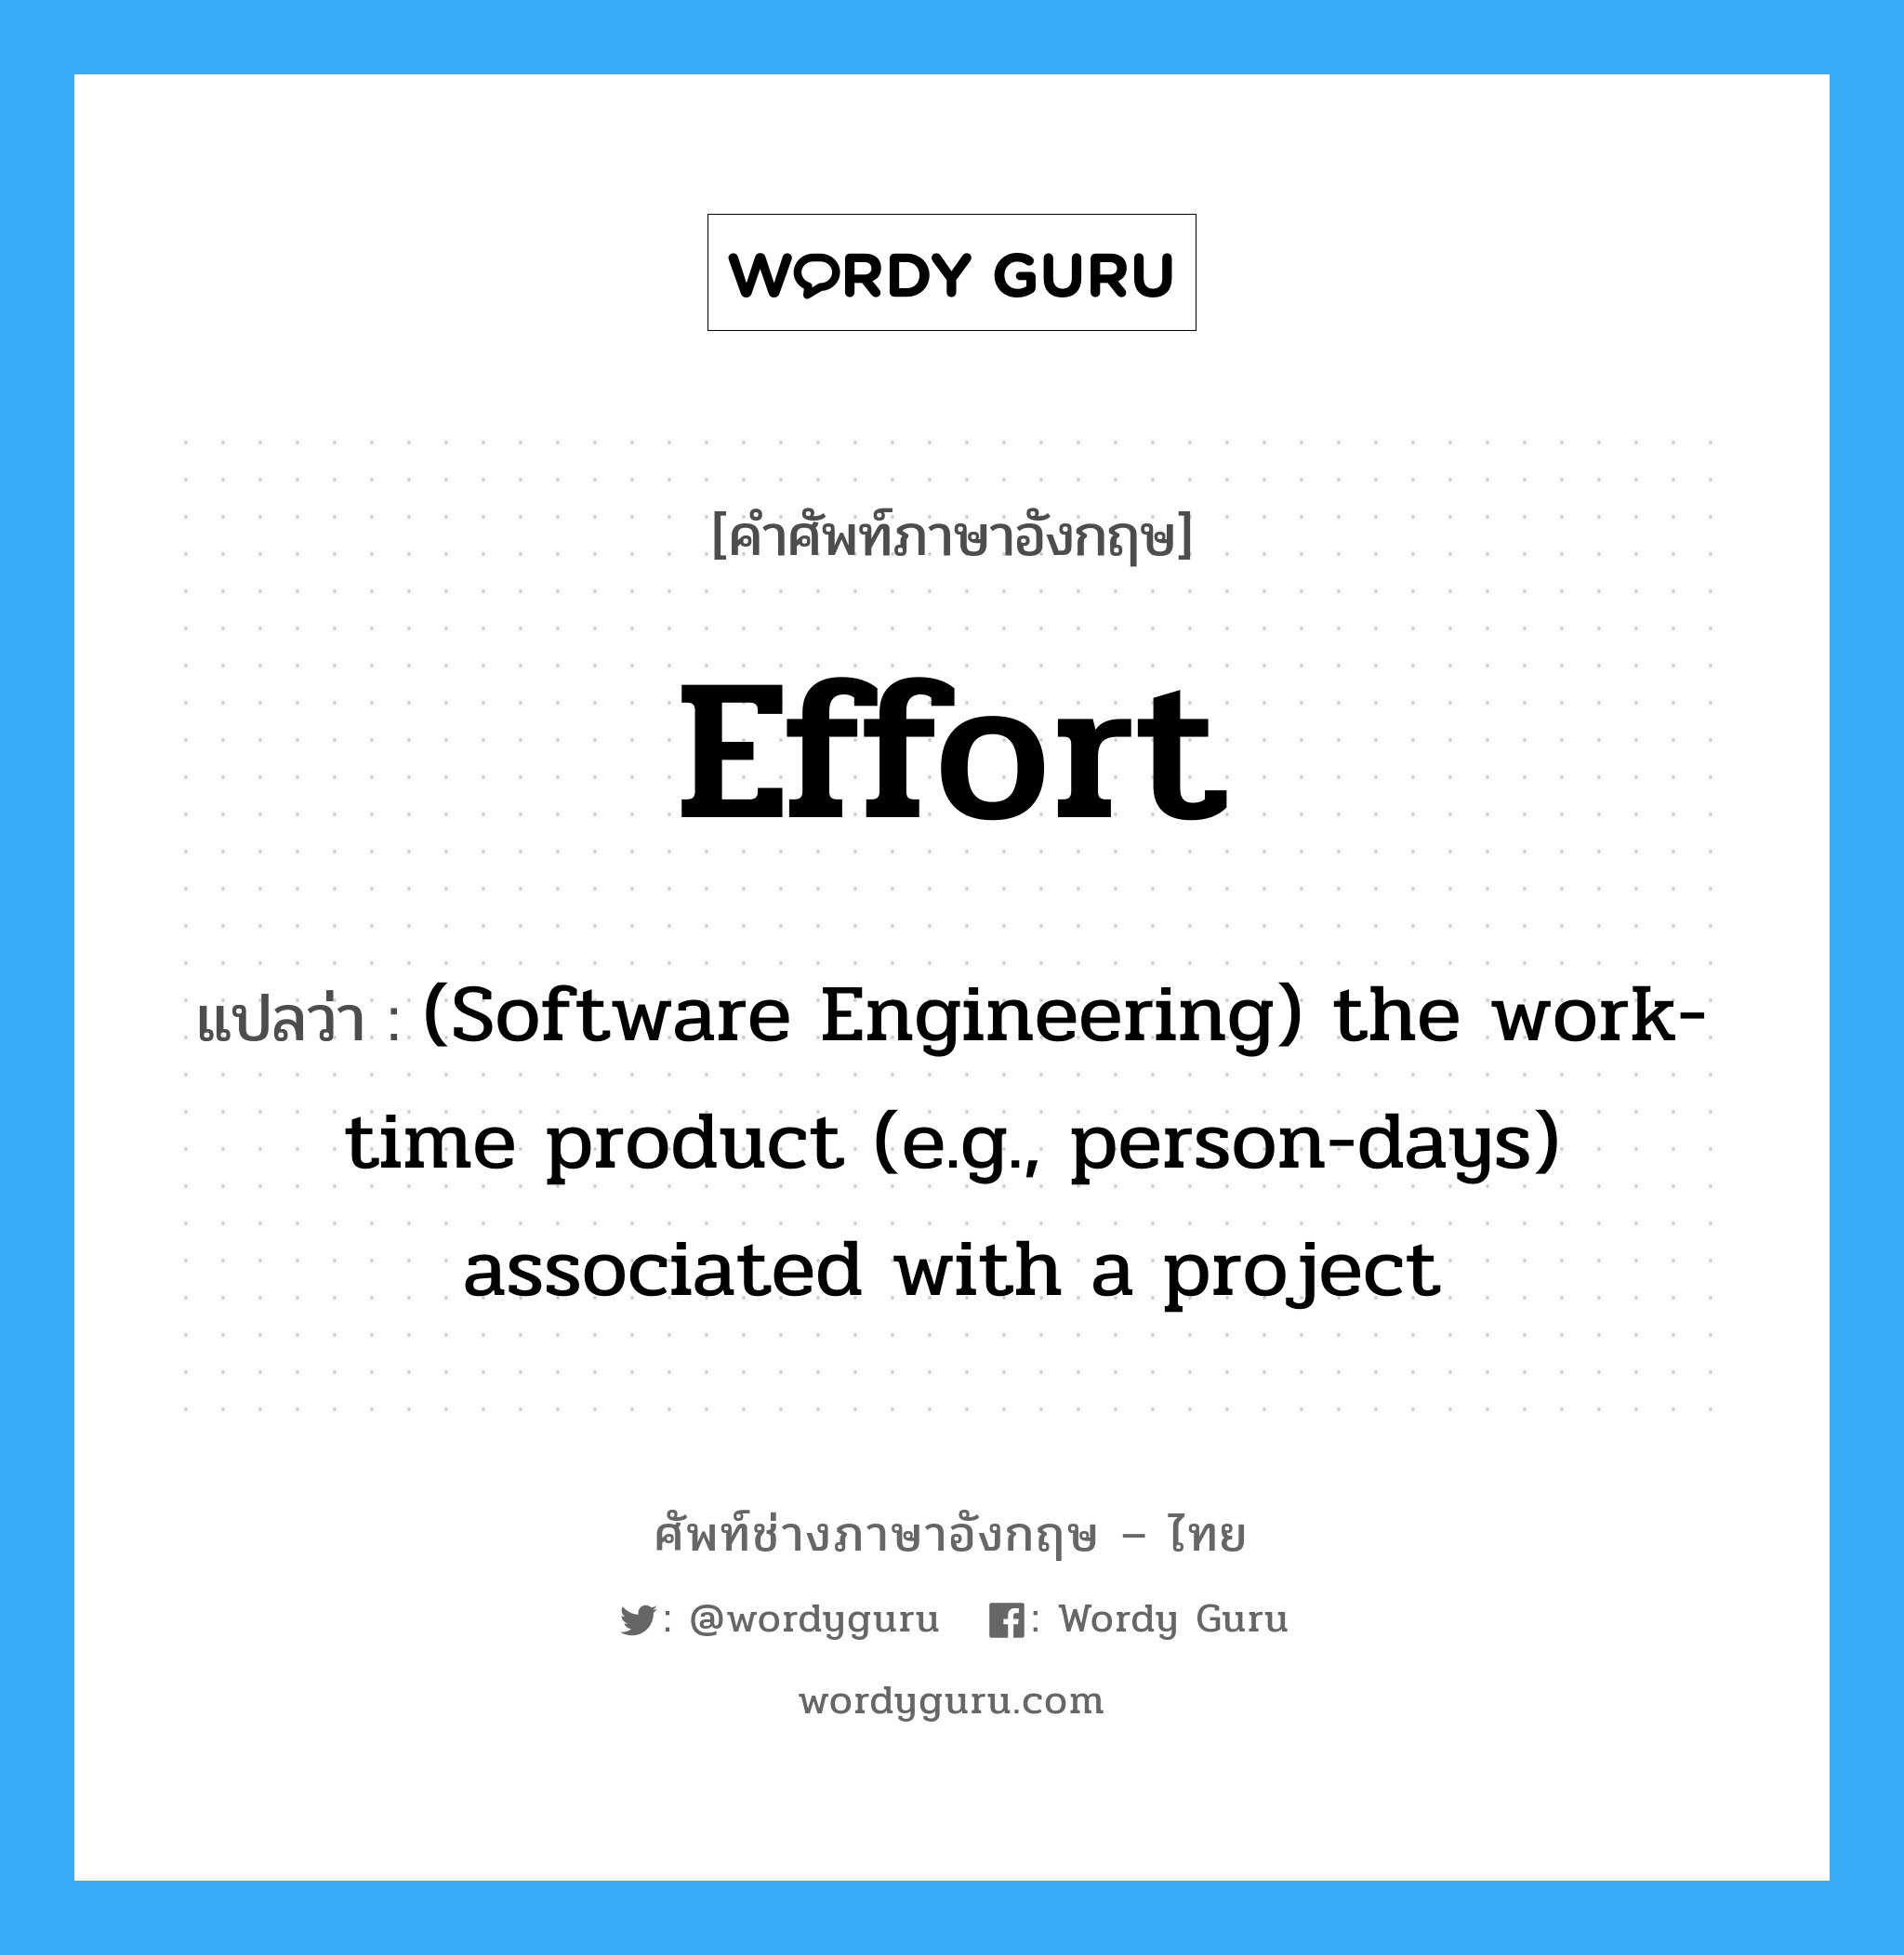 (Software Engineering) the work-time product (e.g., person-days) associated with a project ภาษาอังกฤษ?, คำศัพท์ช่างภาษาอังกฤษ - ไทย (Software Engineering) the work-time product (e.g., person-days) associated with a project คำศัพท์ภาษาอังกฤษ (Software Engineering) the work-time product (e.g., person-days) associated with a project แปลว่า Effort